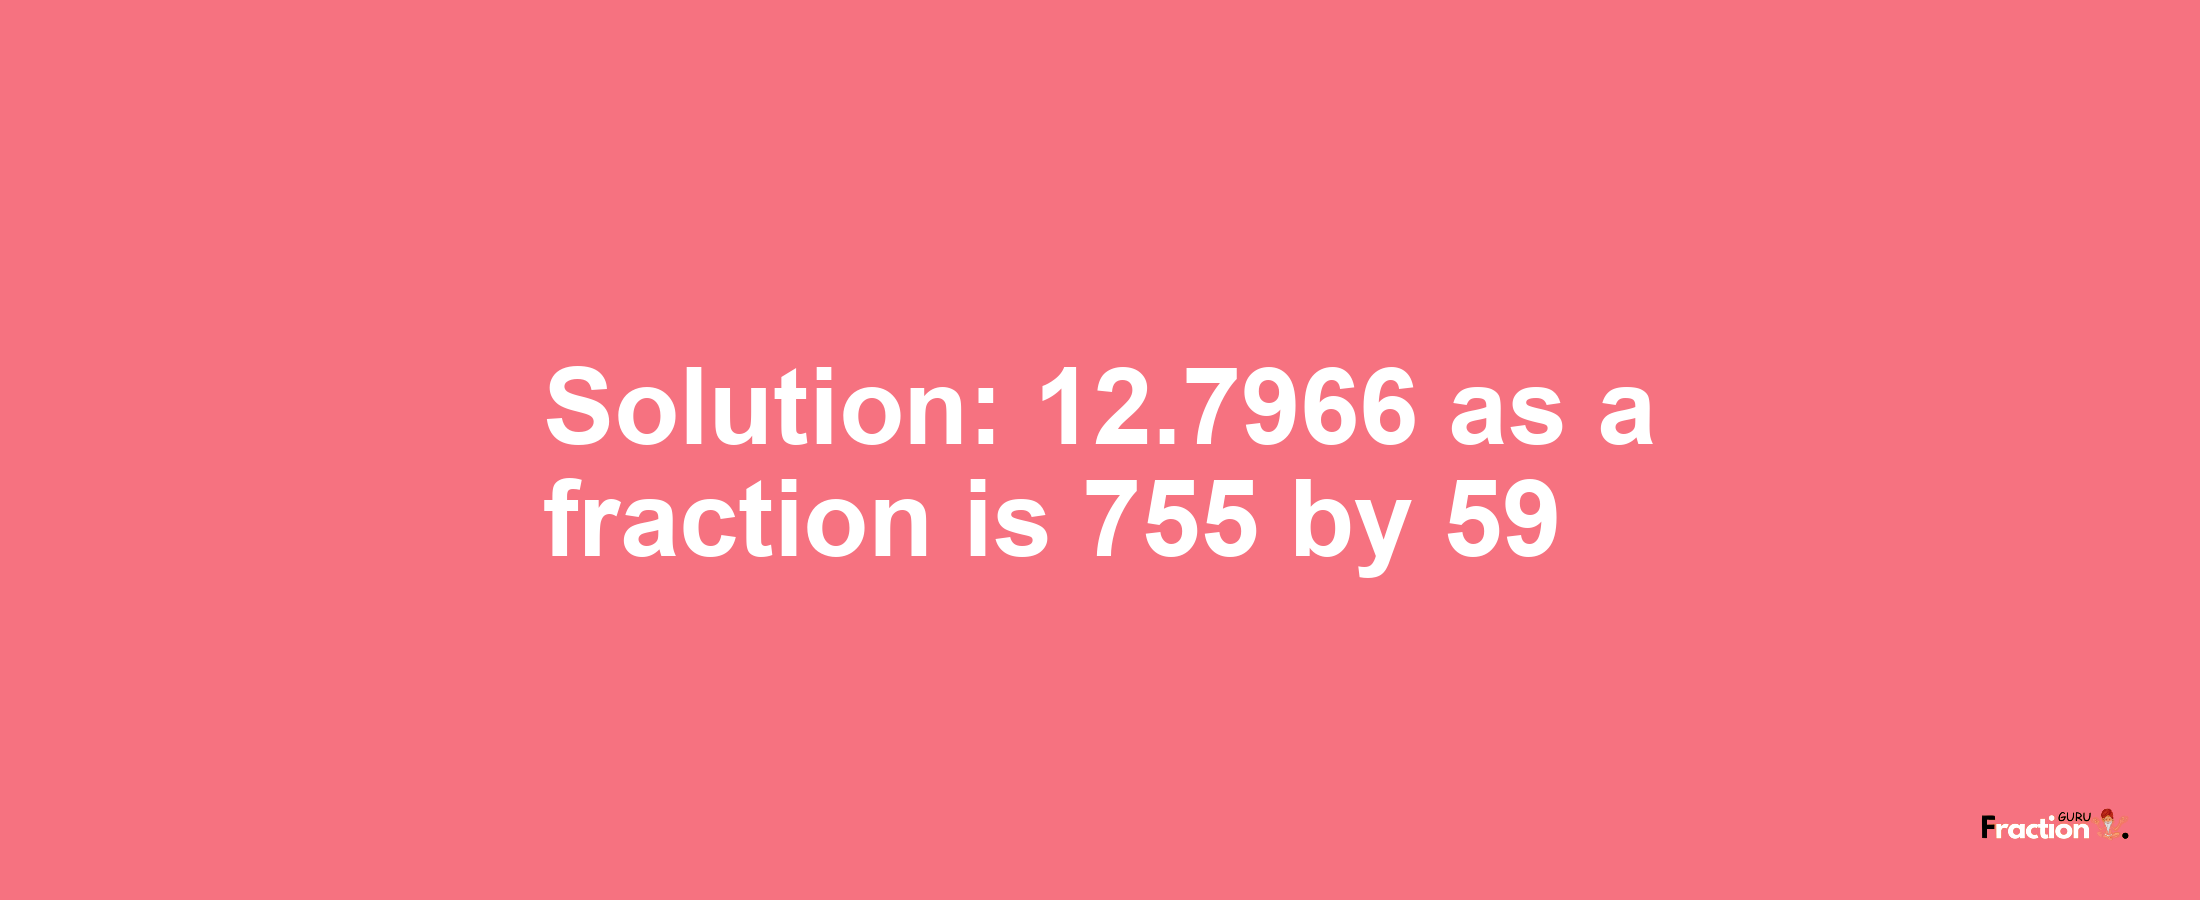 Solution:12.7966 as a fraction is 755/59